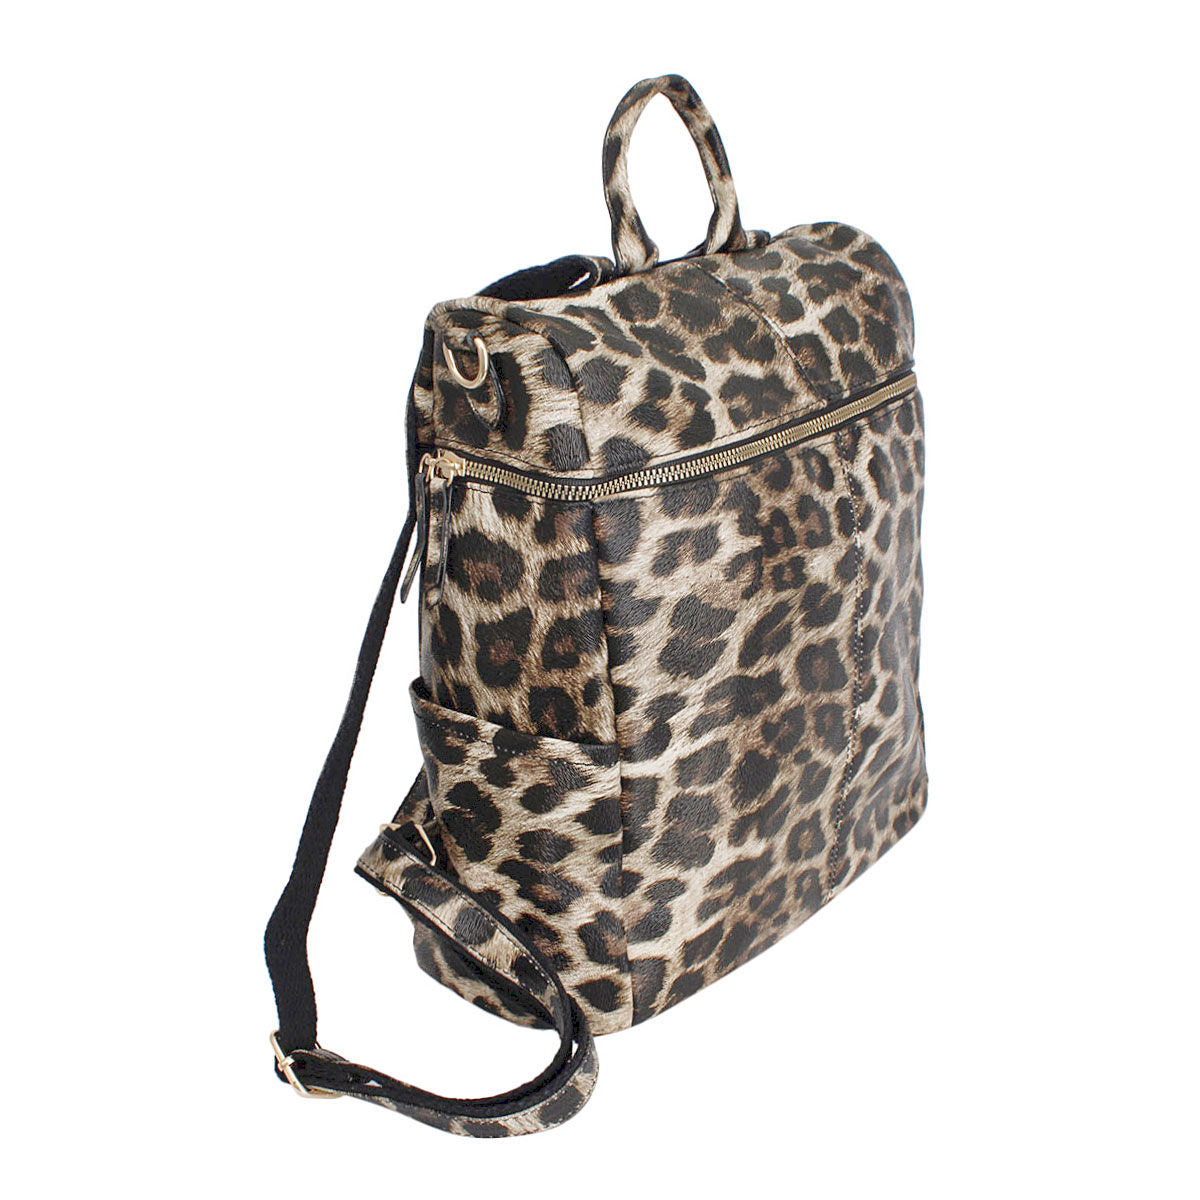 Leopard Square Backpack Purse